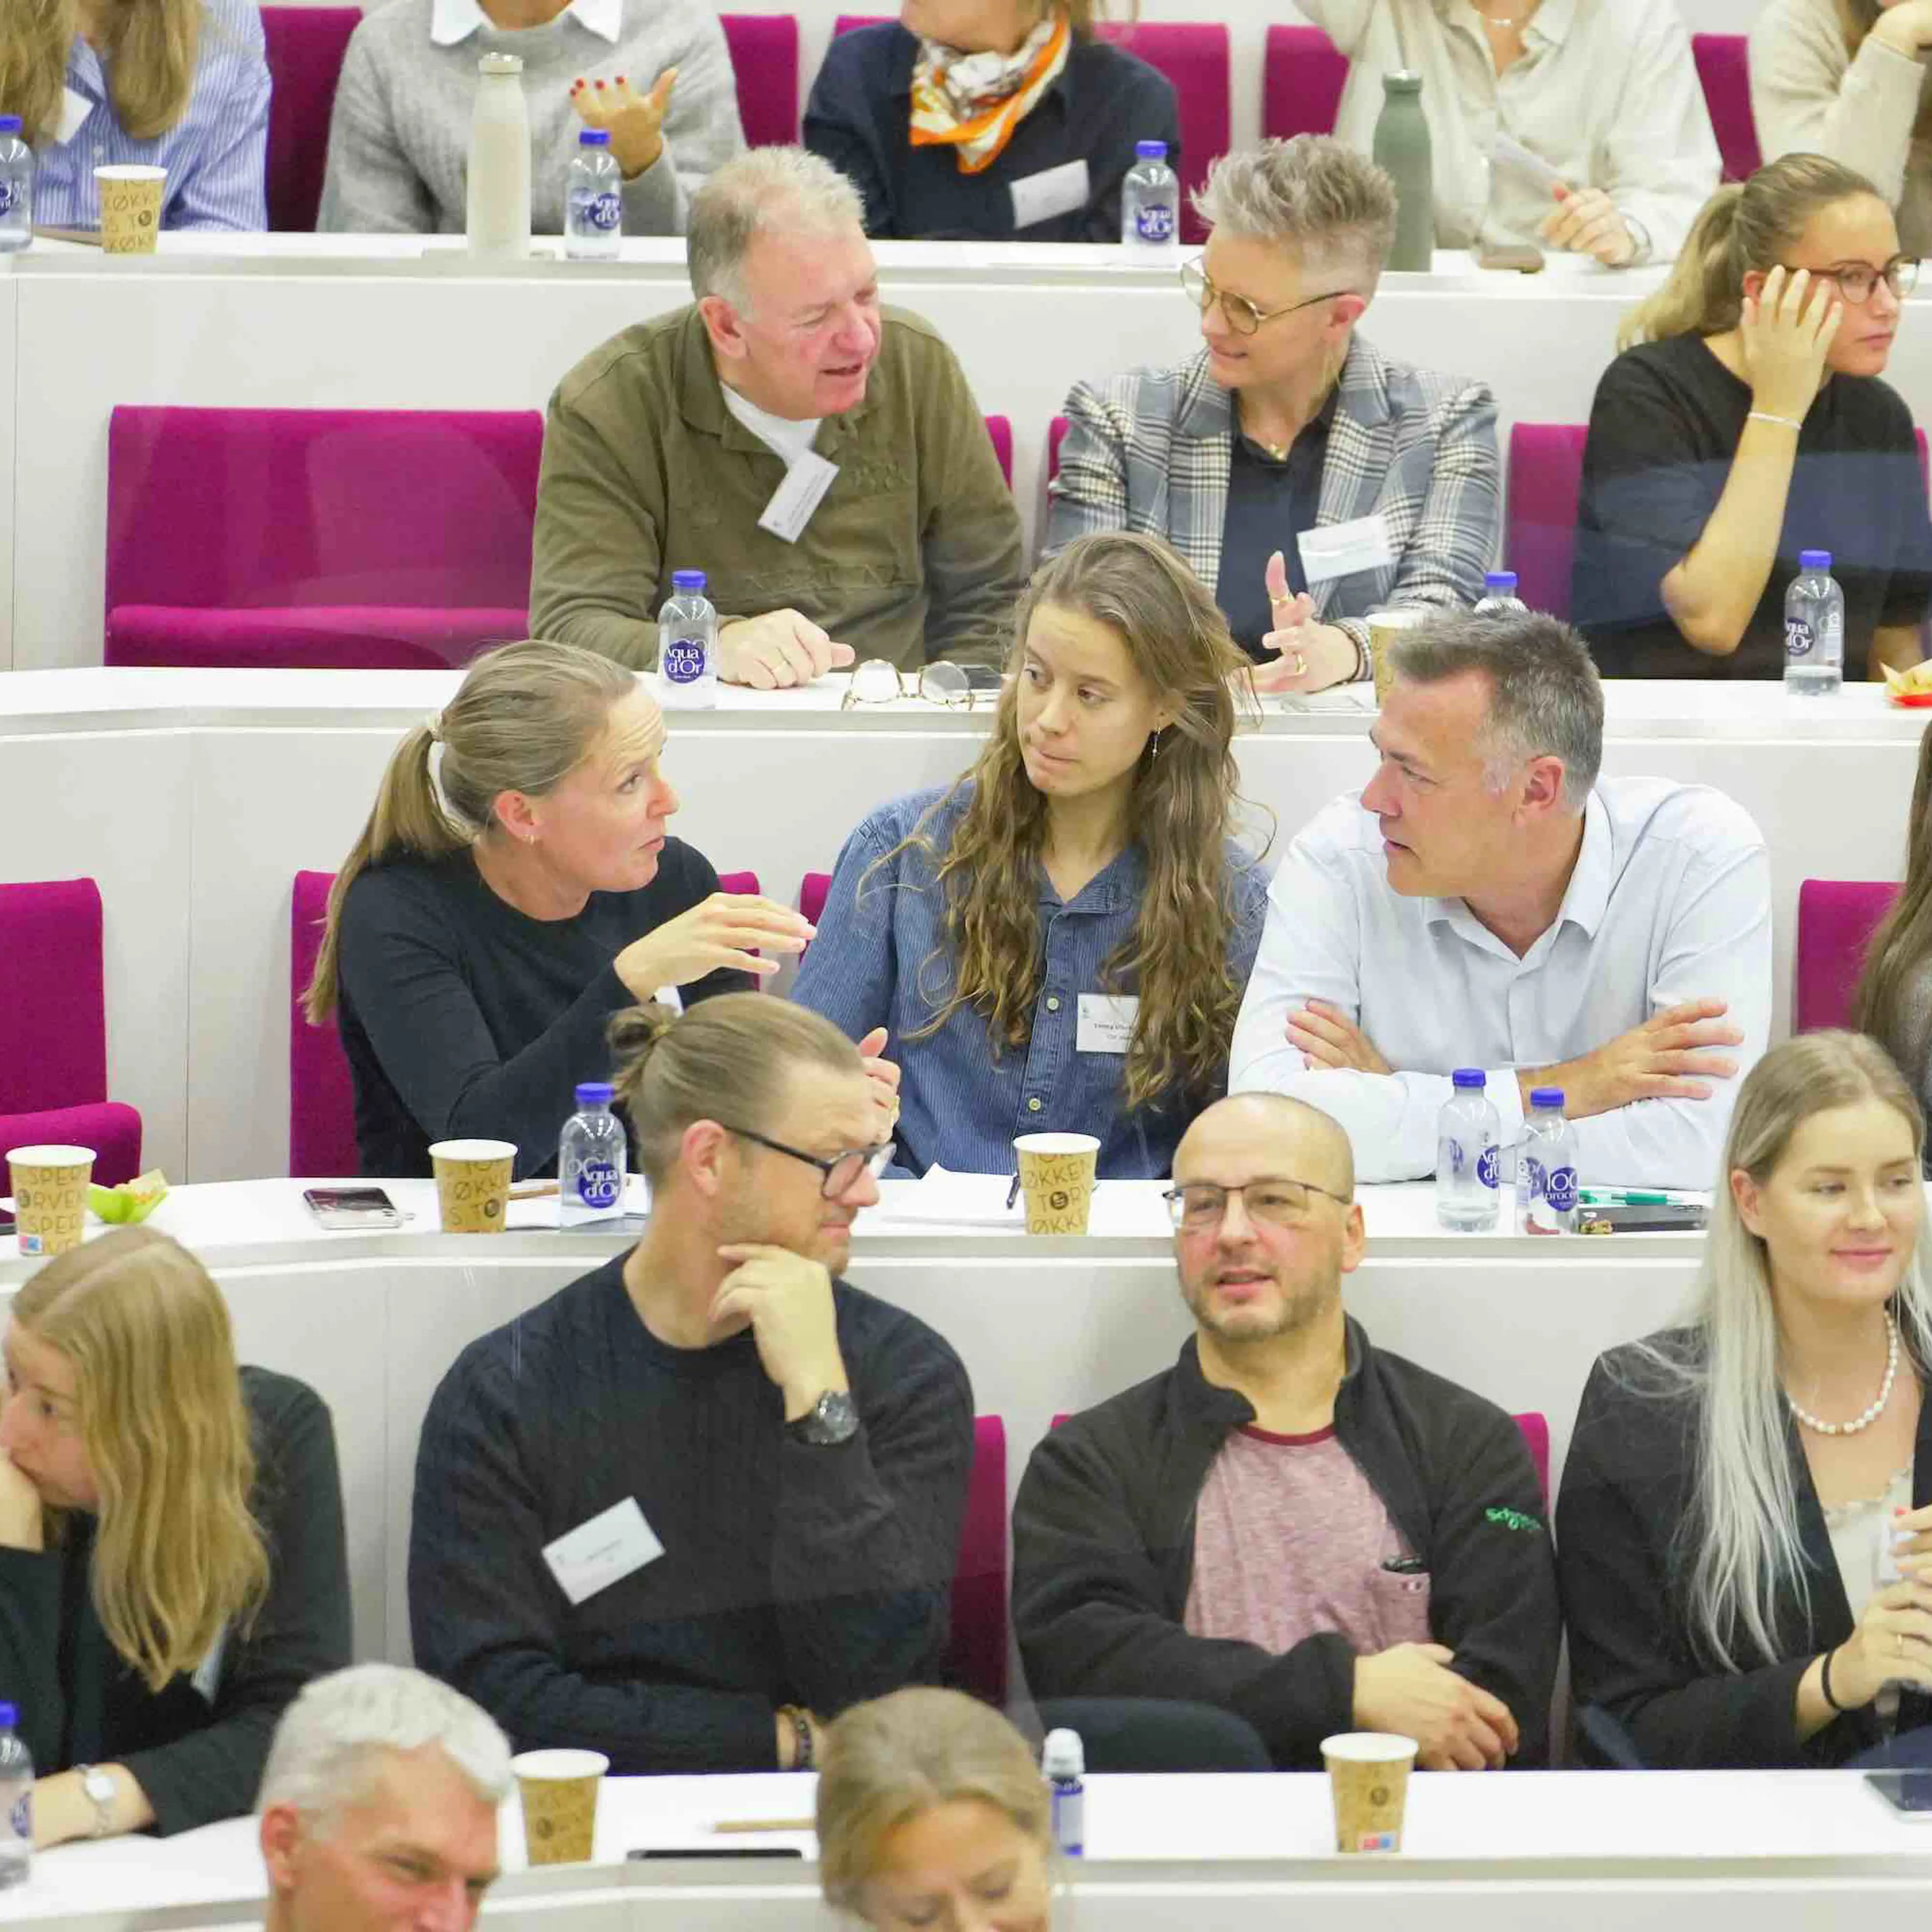 Audience speaking together at the New Management Strategies for New Generations event